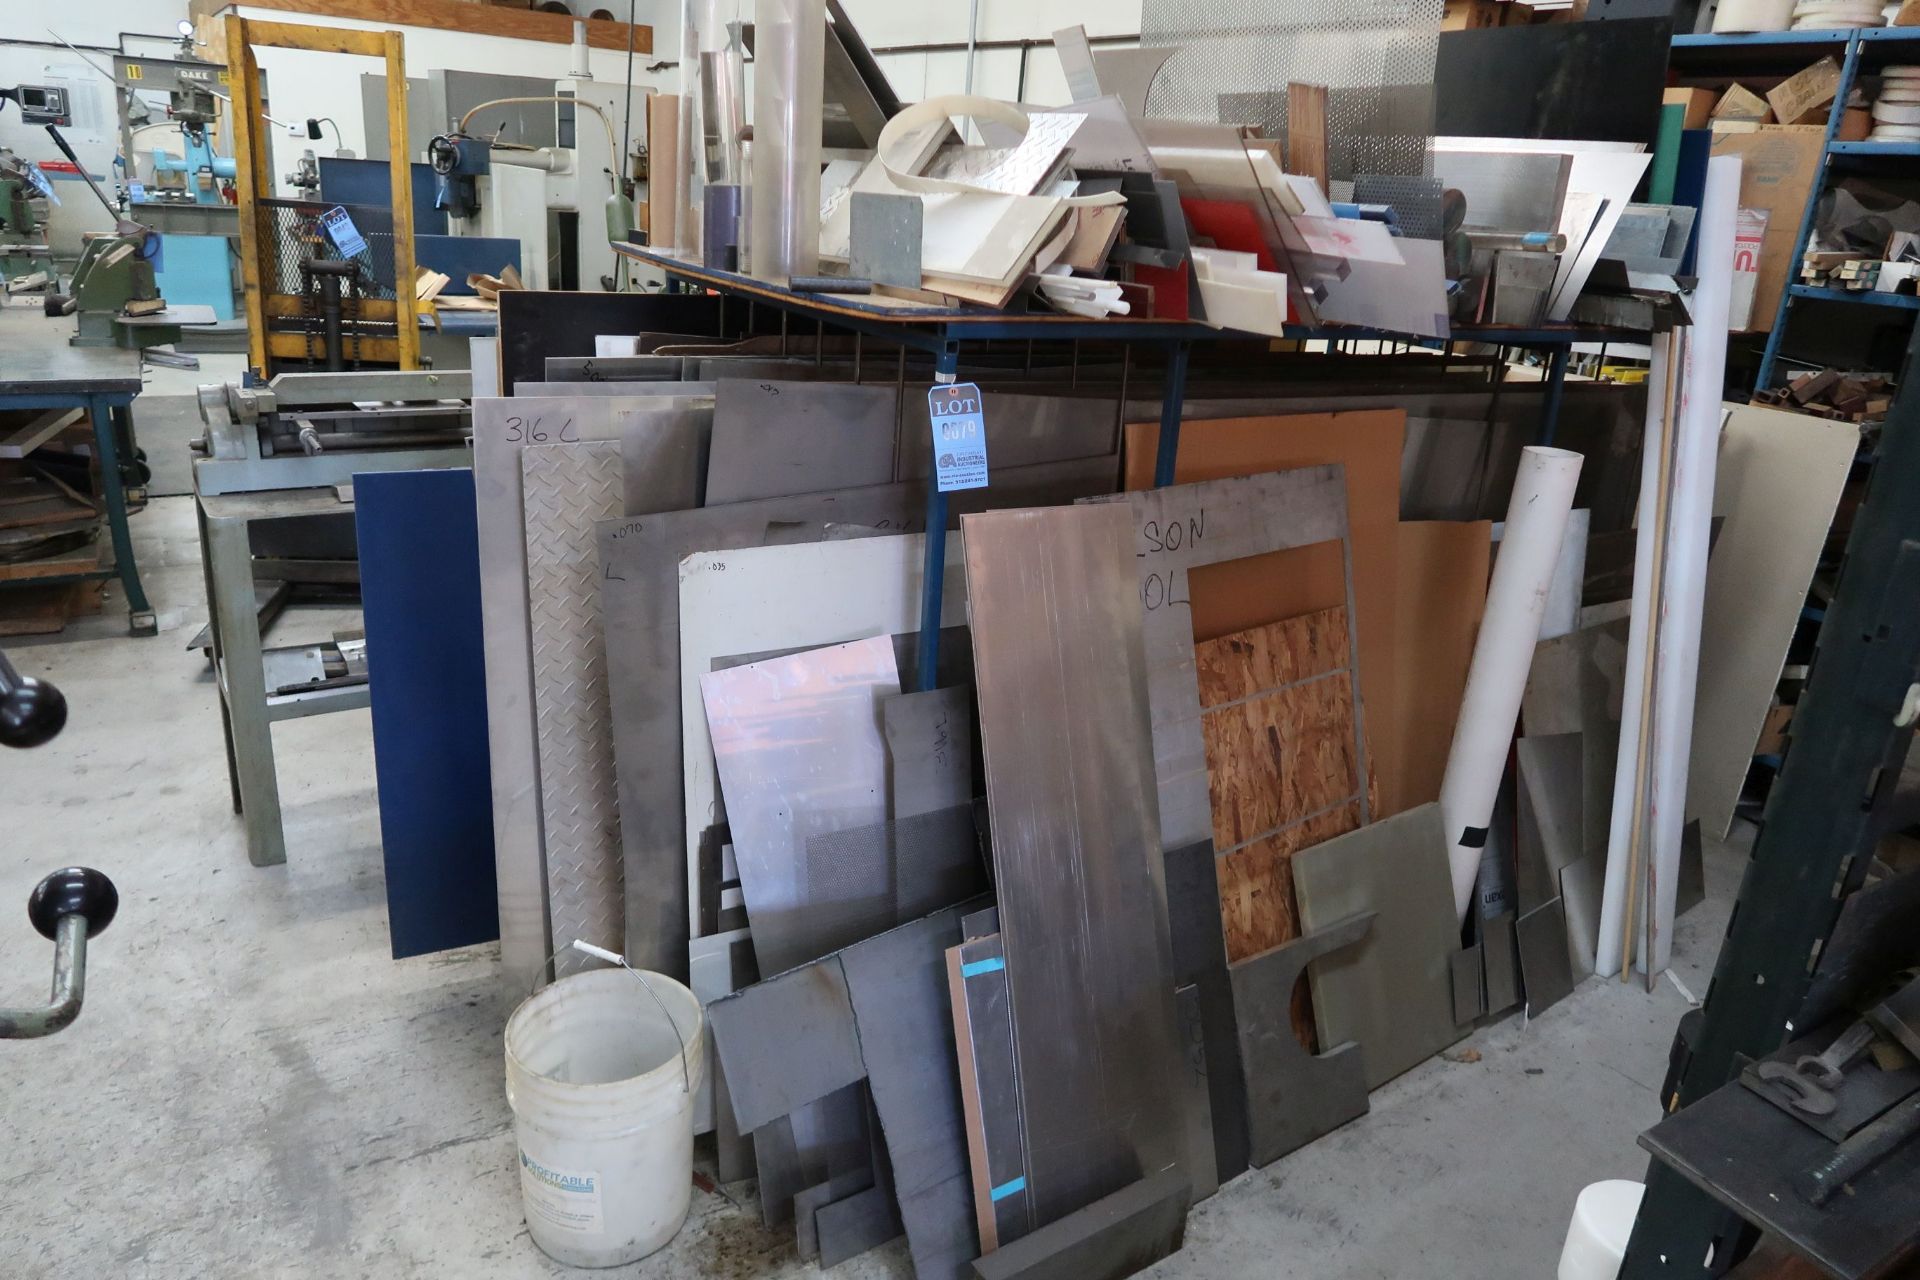 48" X 84" X 58" STEEL SHEET STOCK RACK WITH MISCELLANEOUS SHEET STOCK